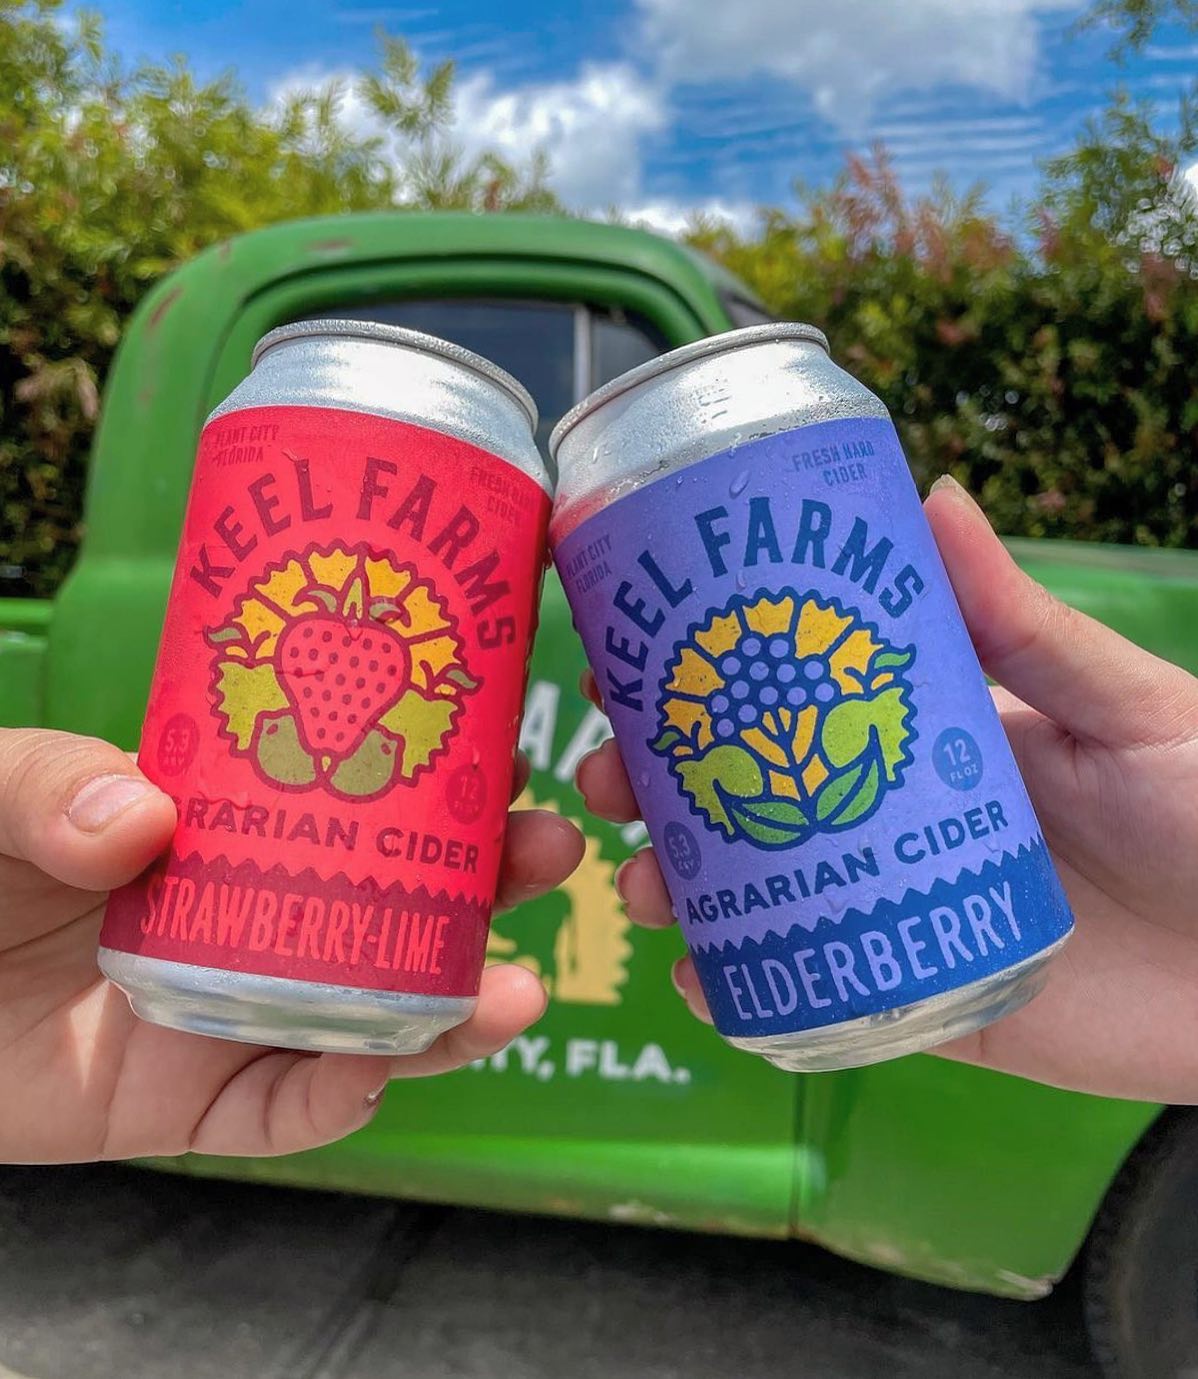 Keel Farms Agrarian Ales + Ciders